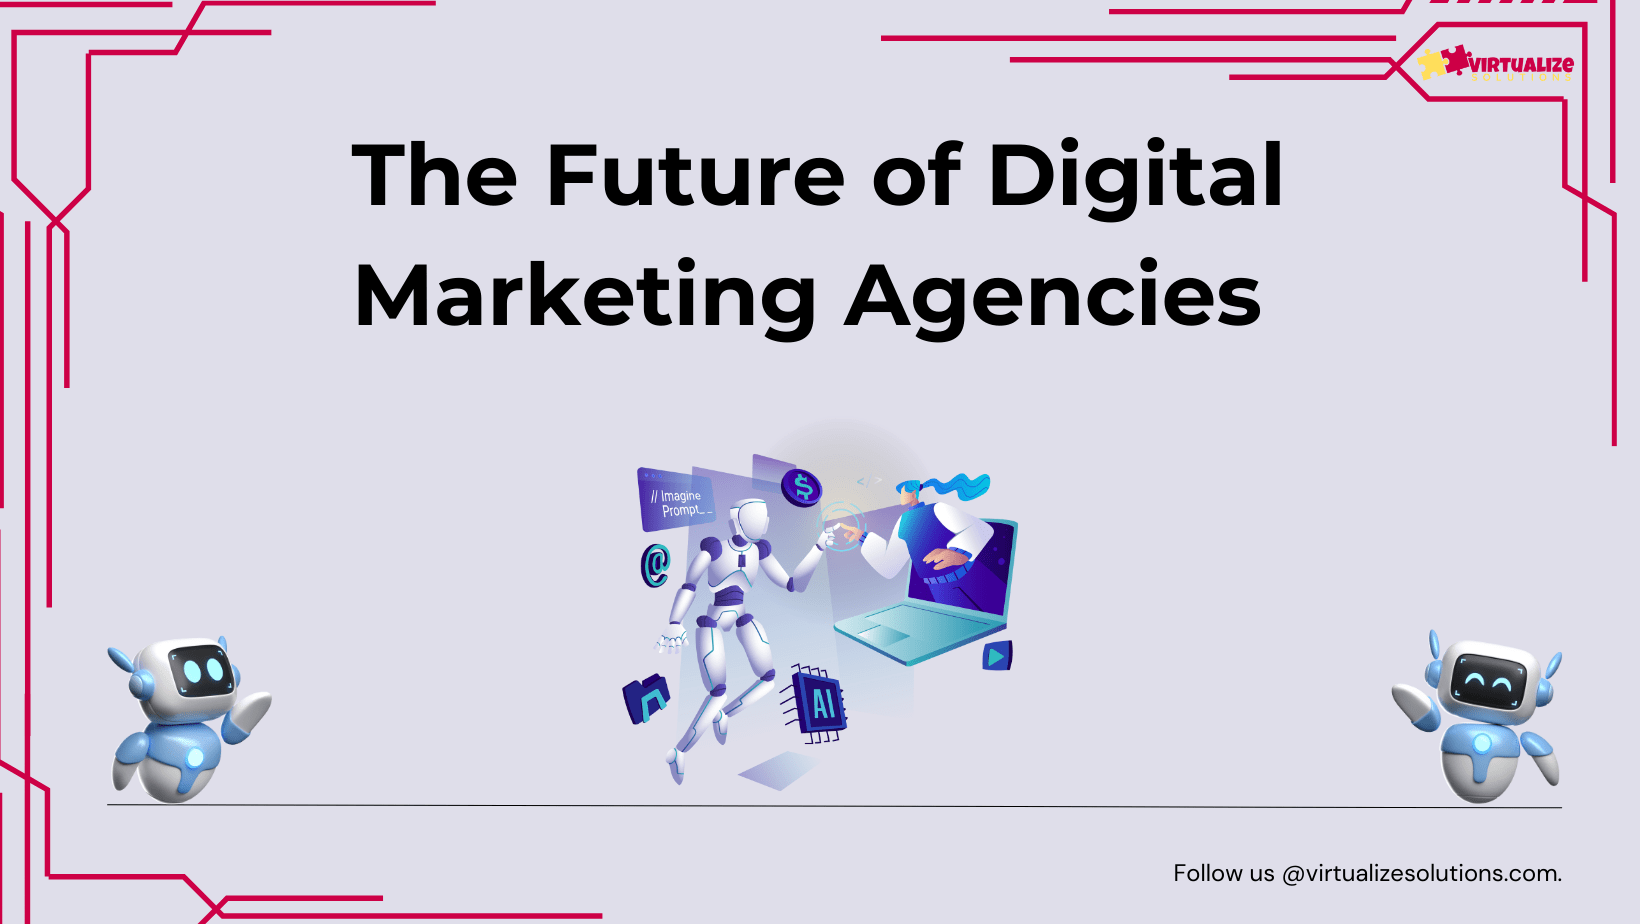 THE FUTURE OF DIGITAL MARKETING AGENCIES: ADAPTING TO NEW TECHNOLOGIES AND TRENDS